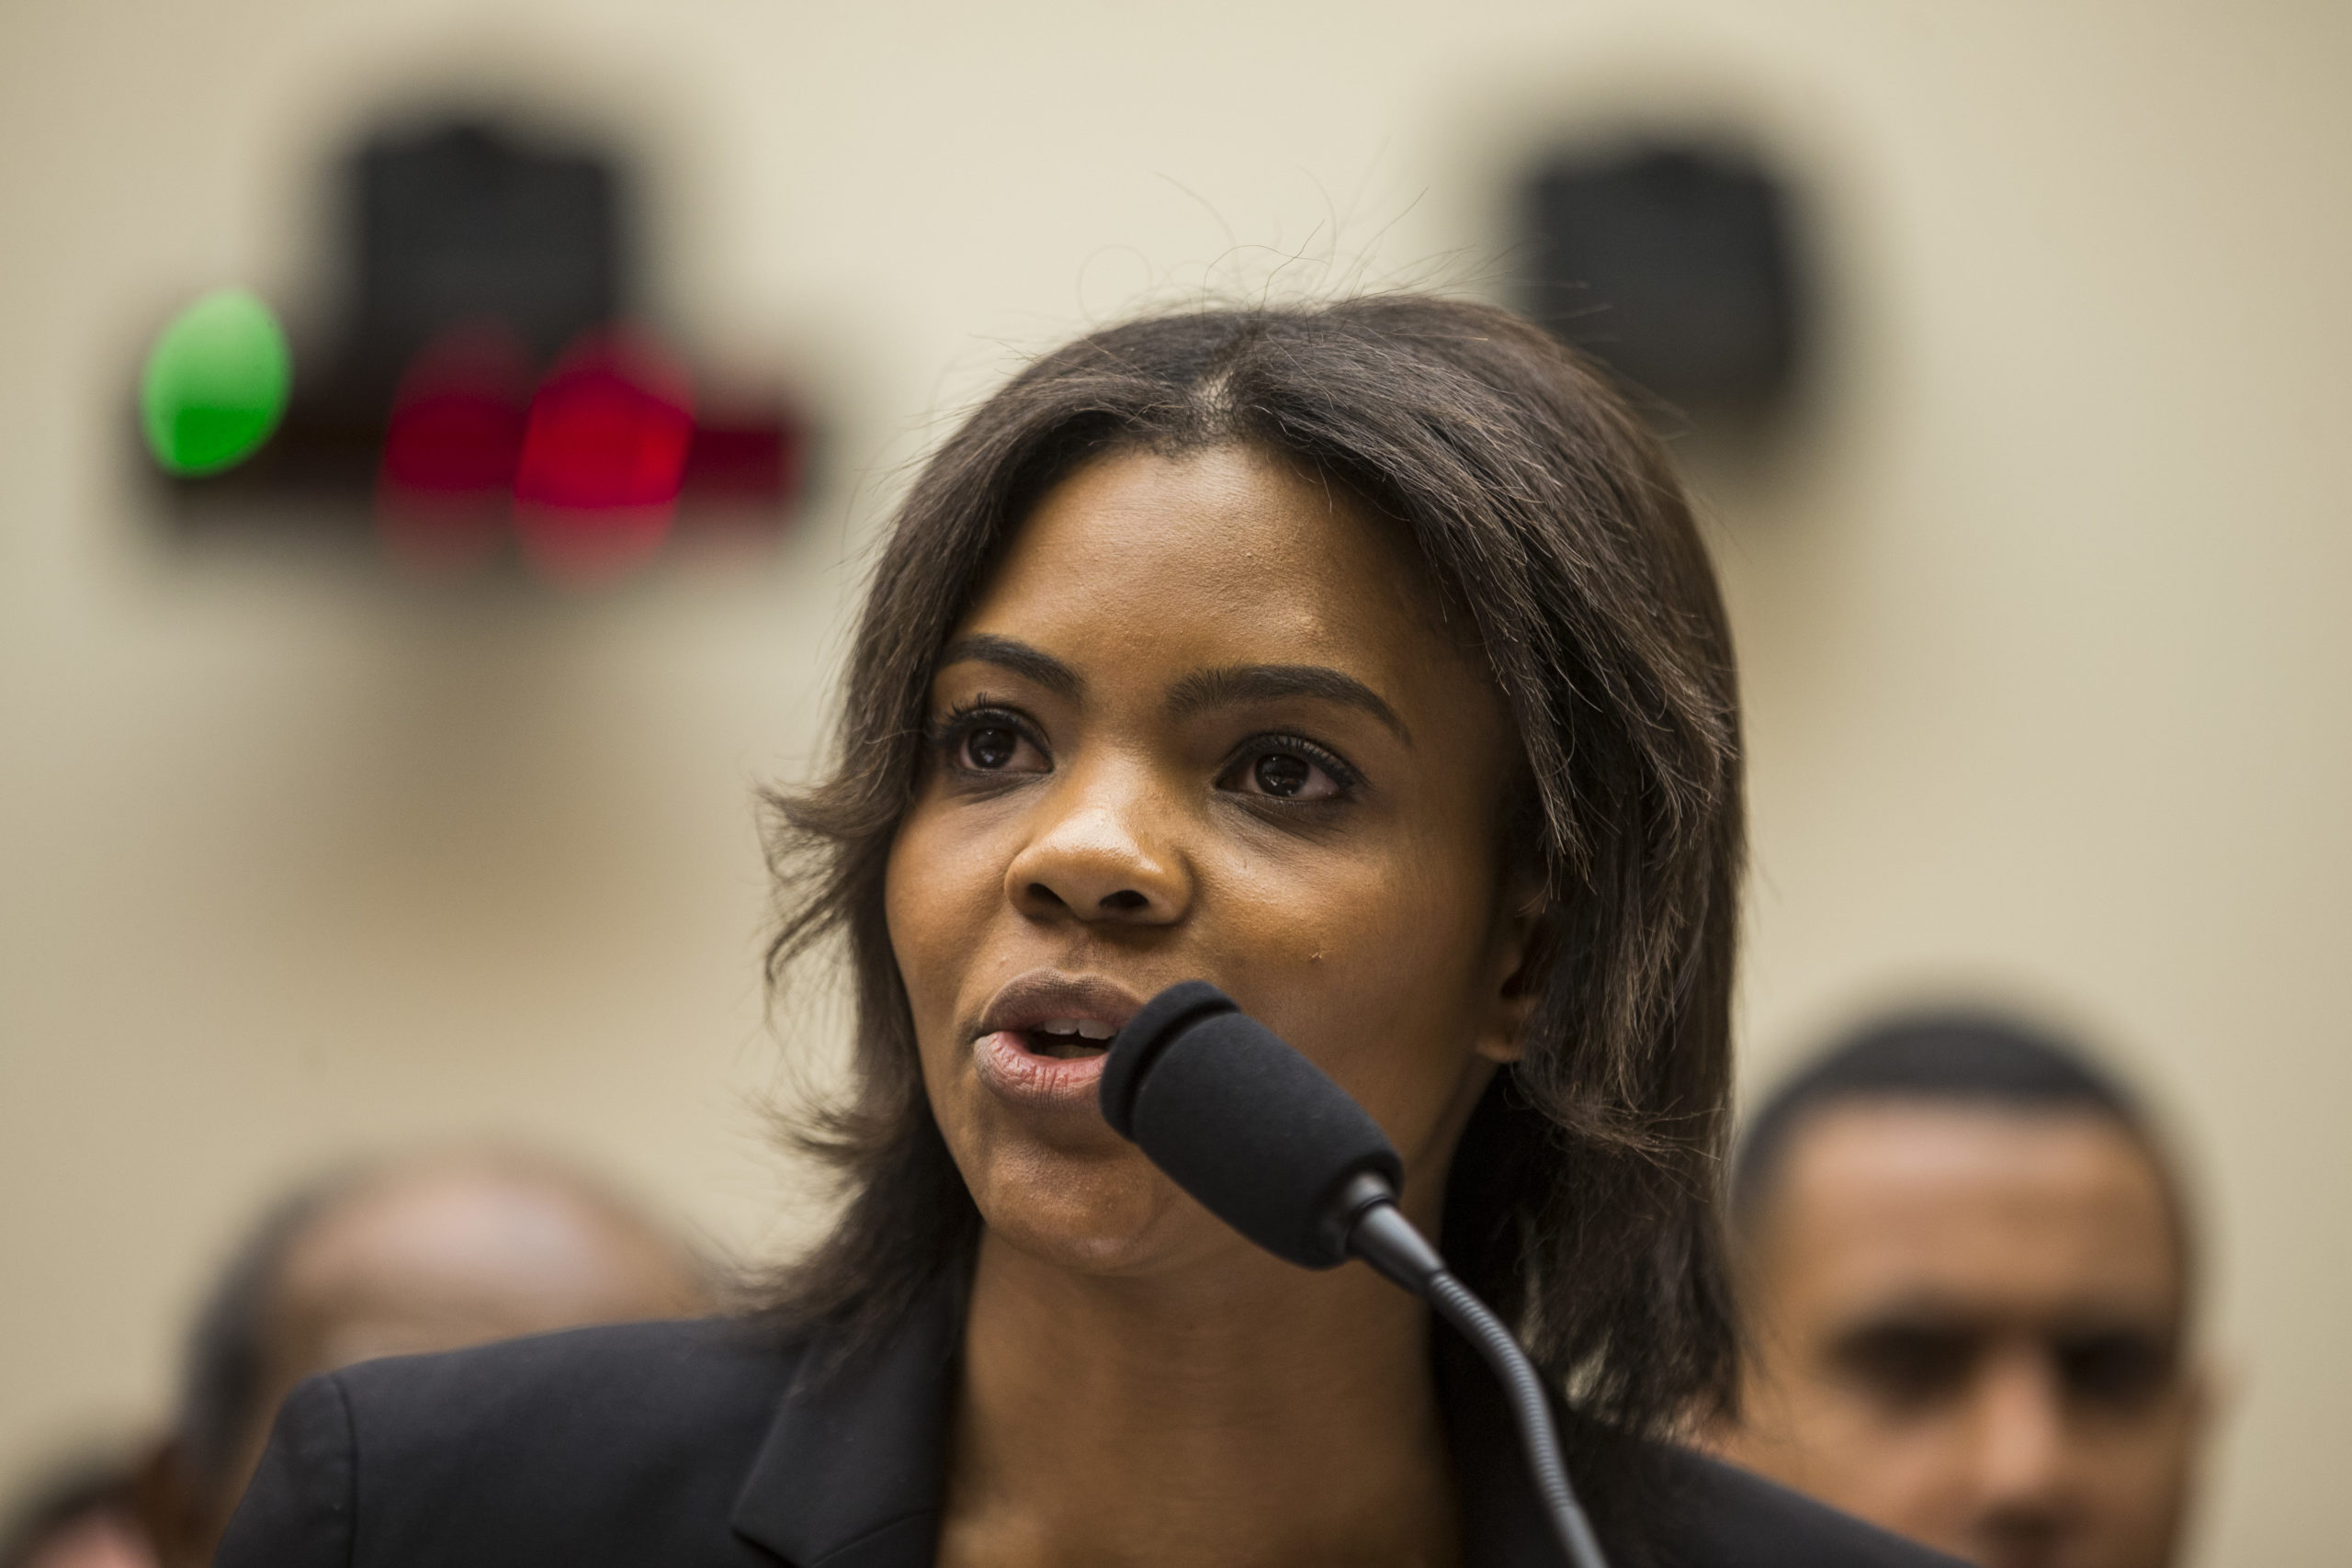 'Embarrassment': Candace Owens in the Hot Seat after Bein...